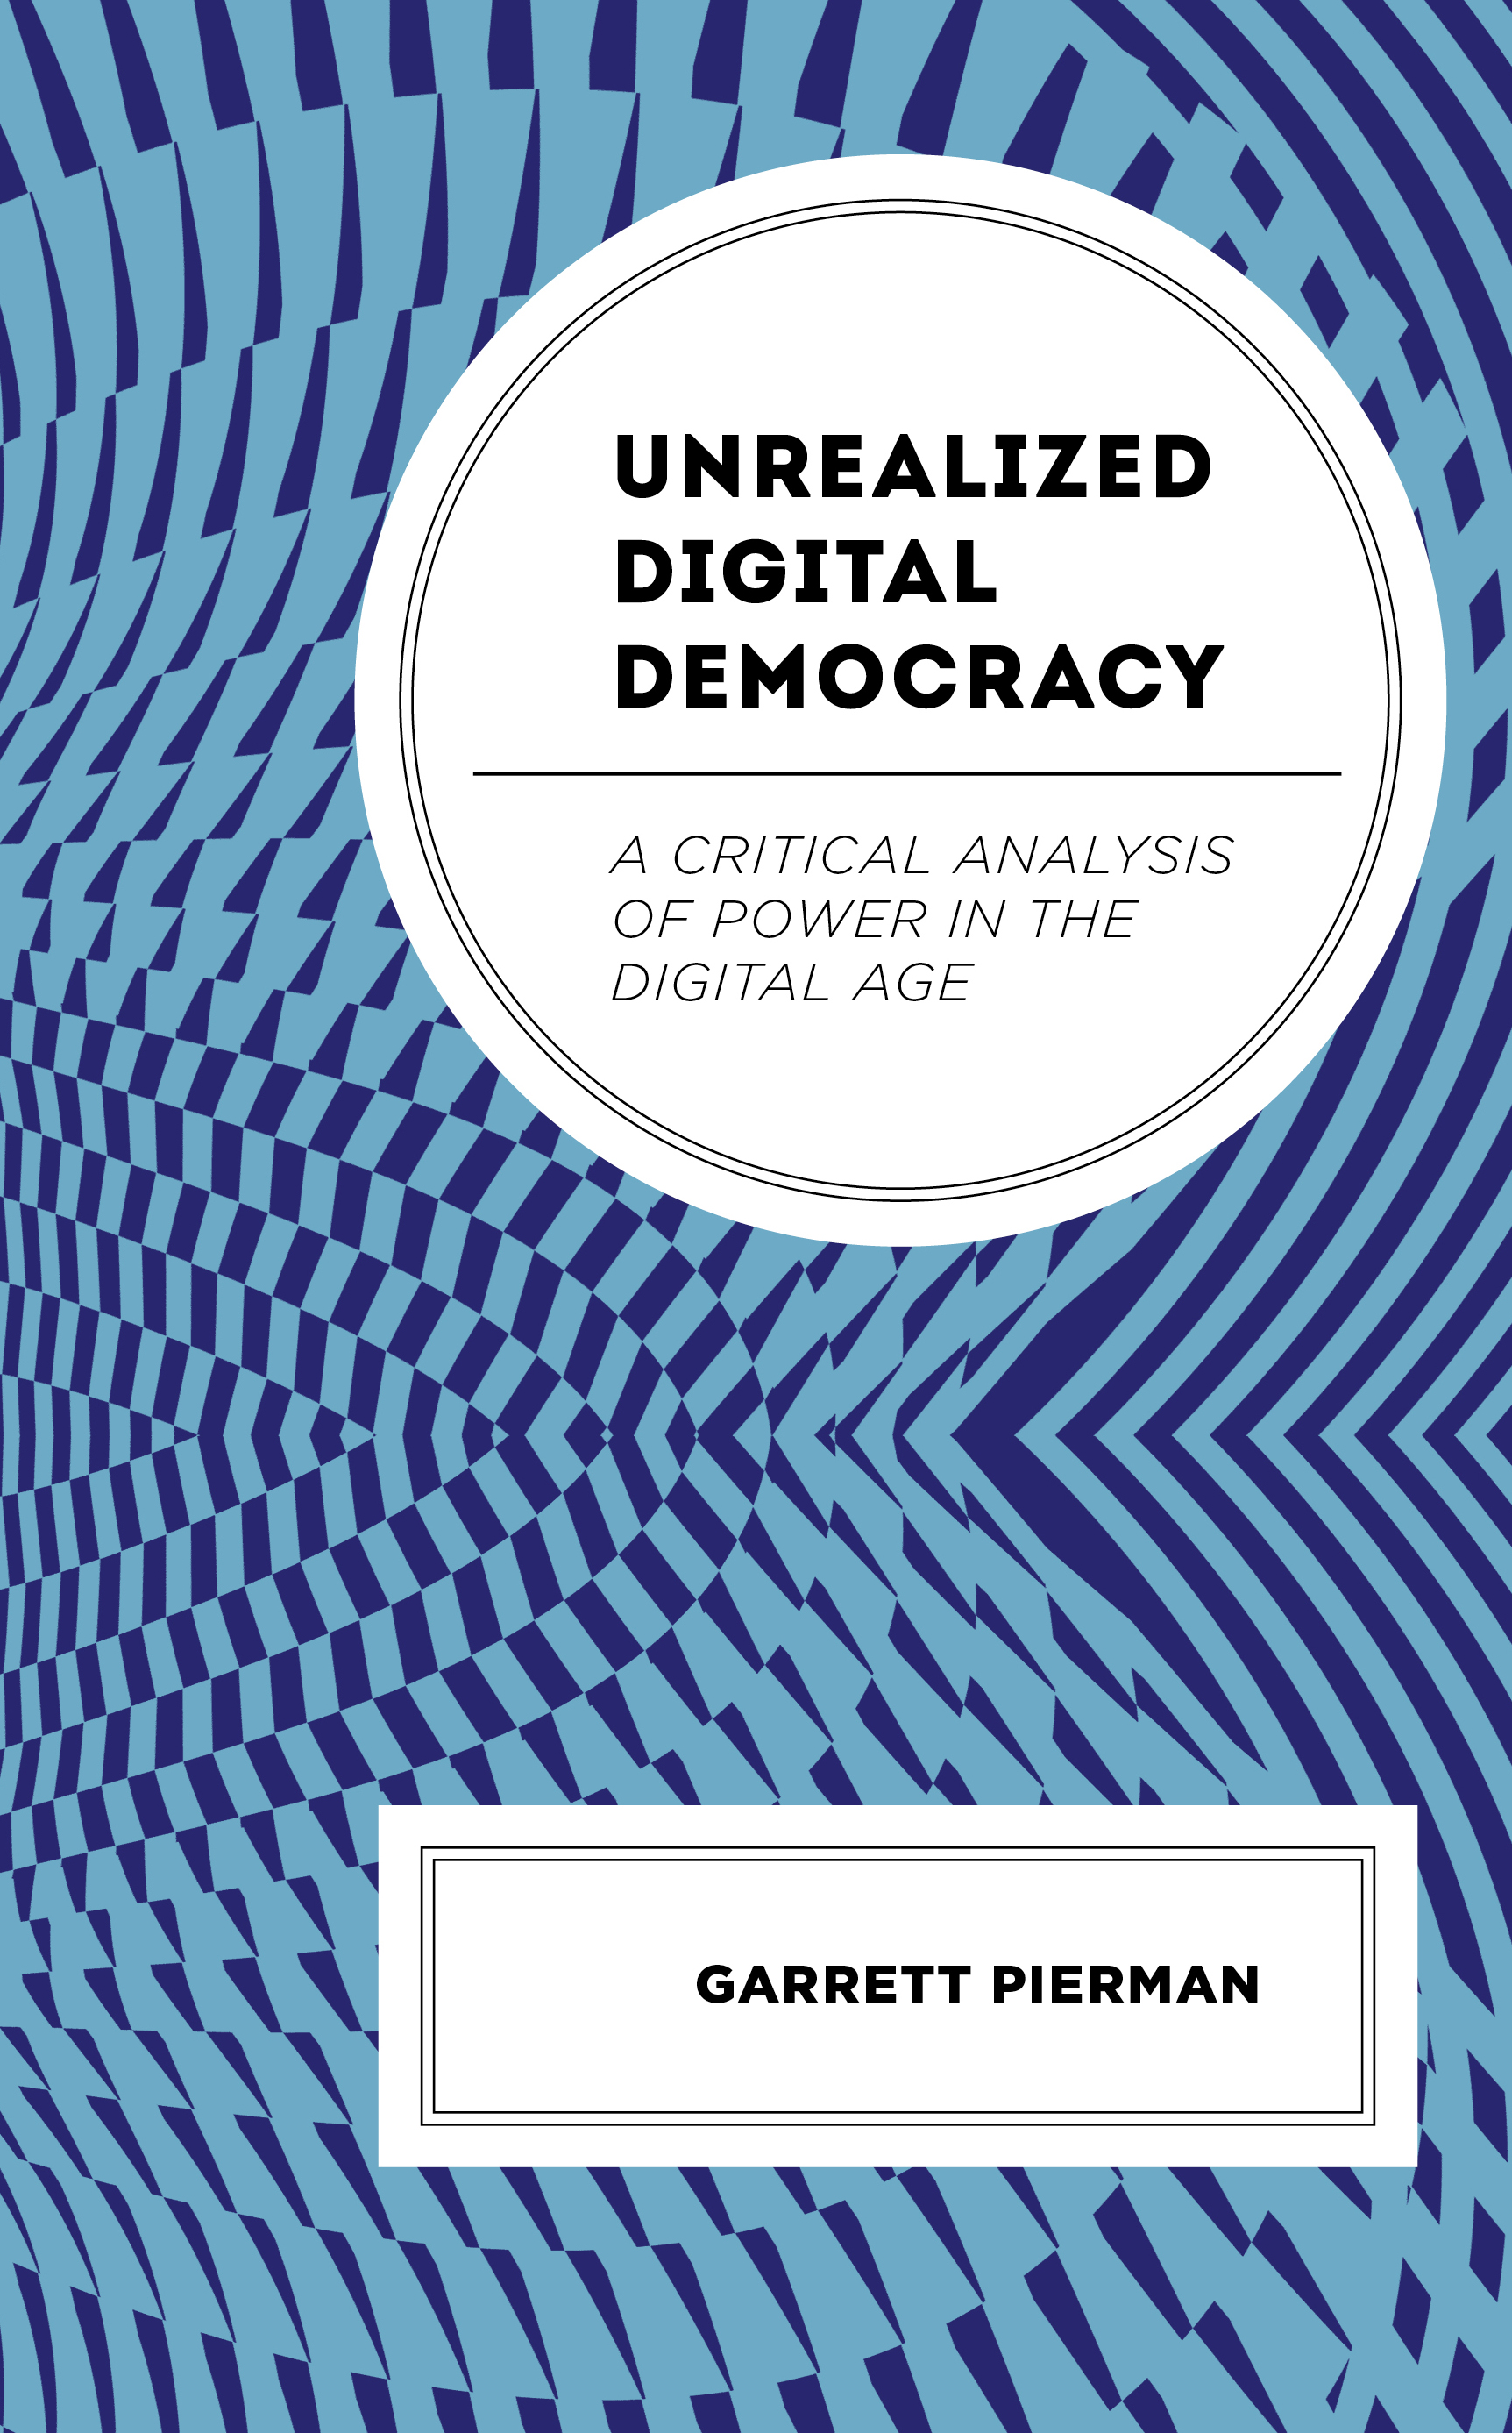 Unrealized Digital Democracy: A Critical Analysis of Power in the Digital Age